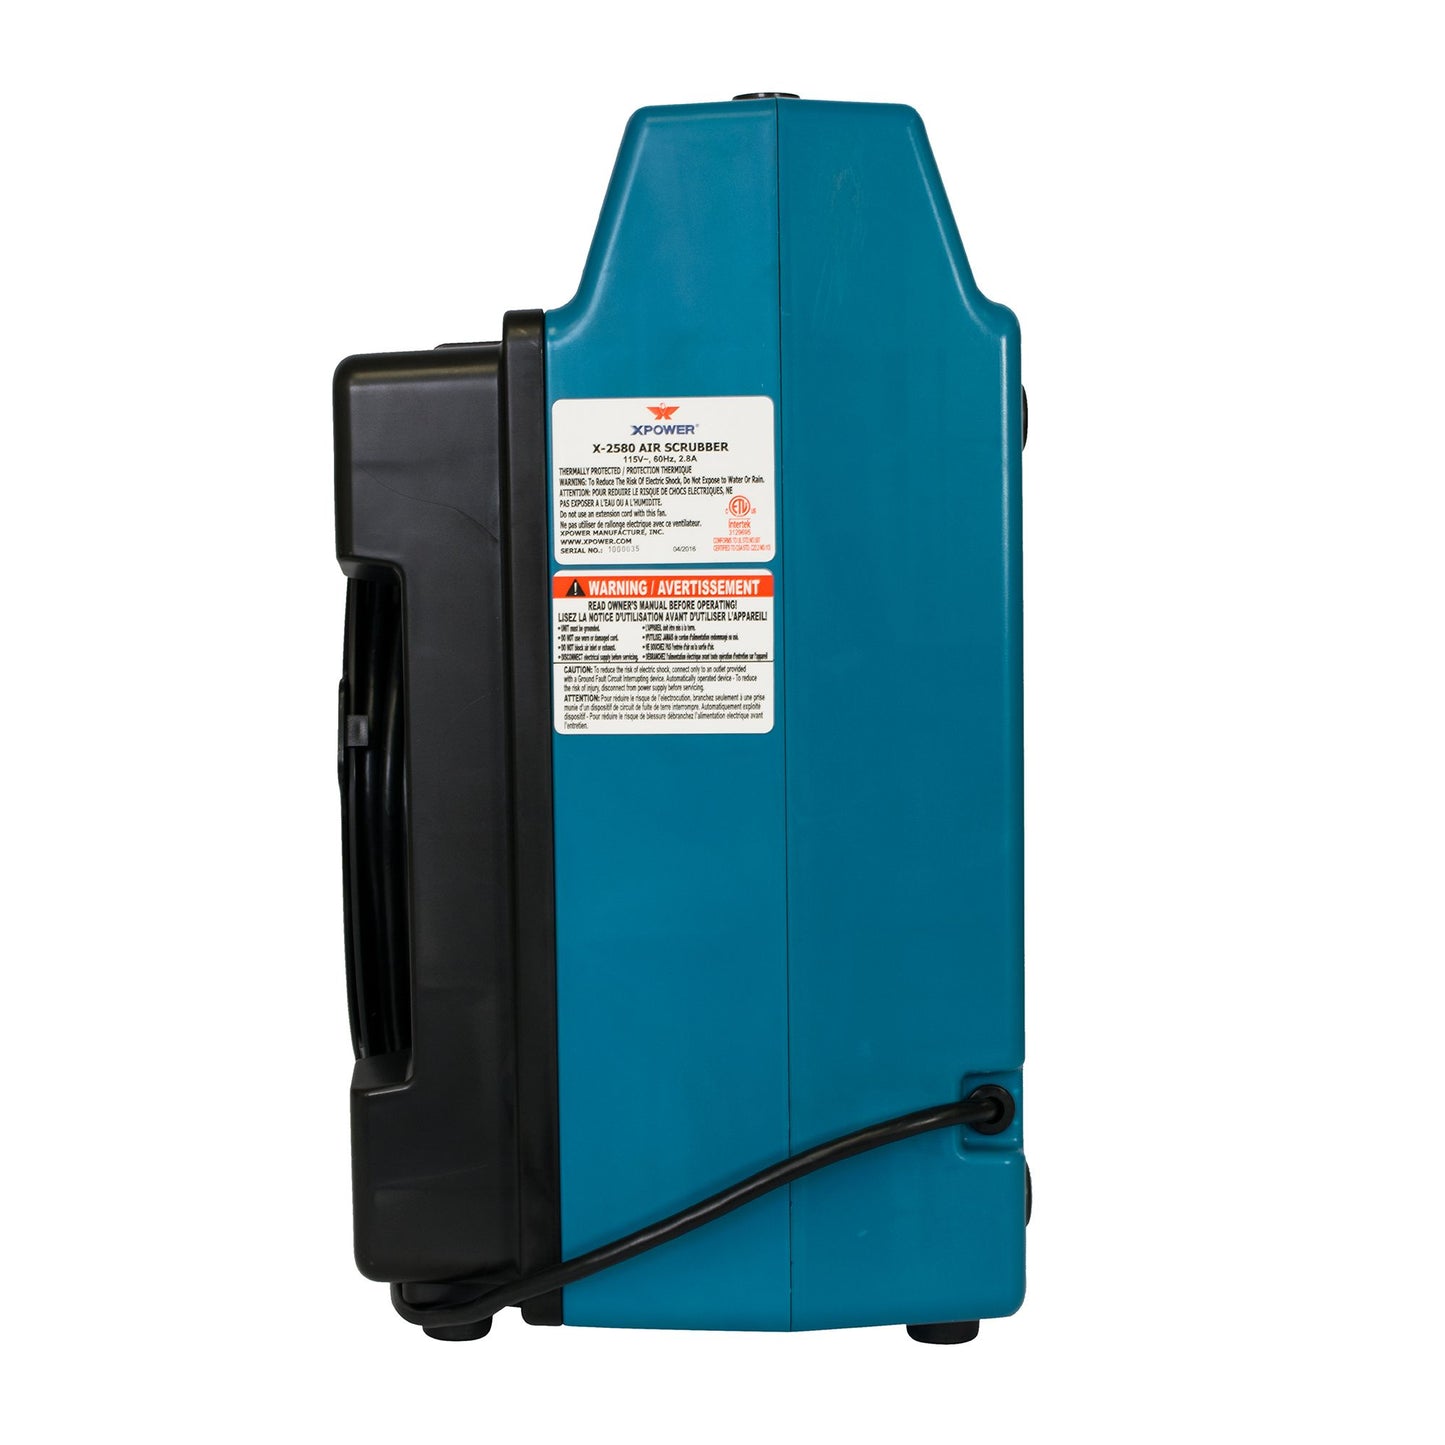 Dark Cyan XPOWER X-2580 Commercial 4 Stage Filtration HEPA Purifier System